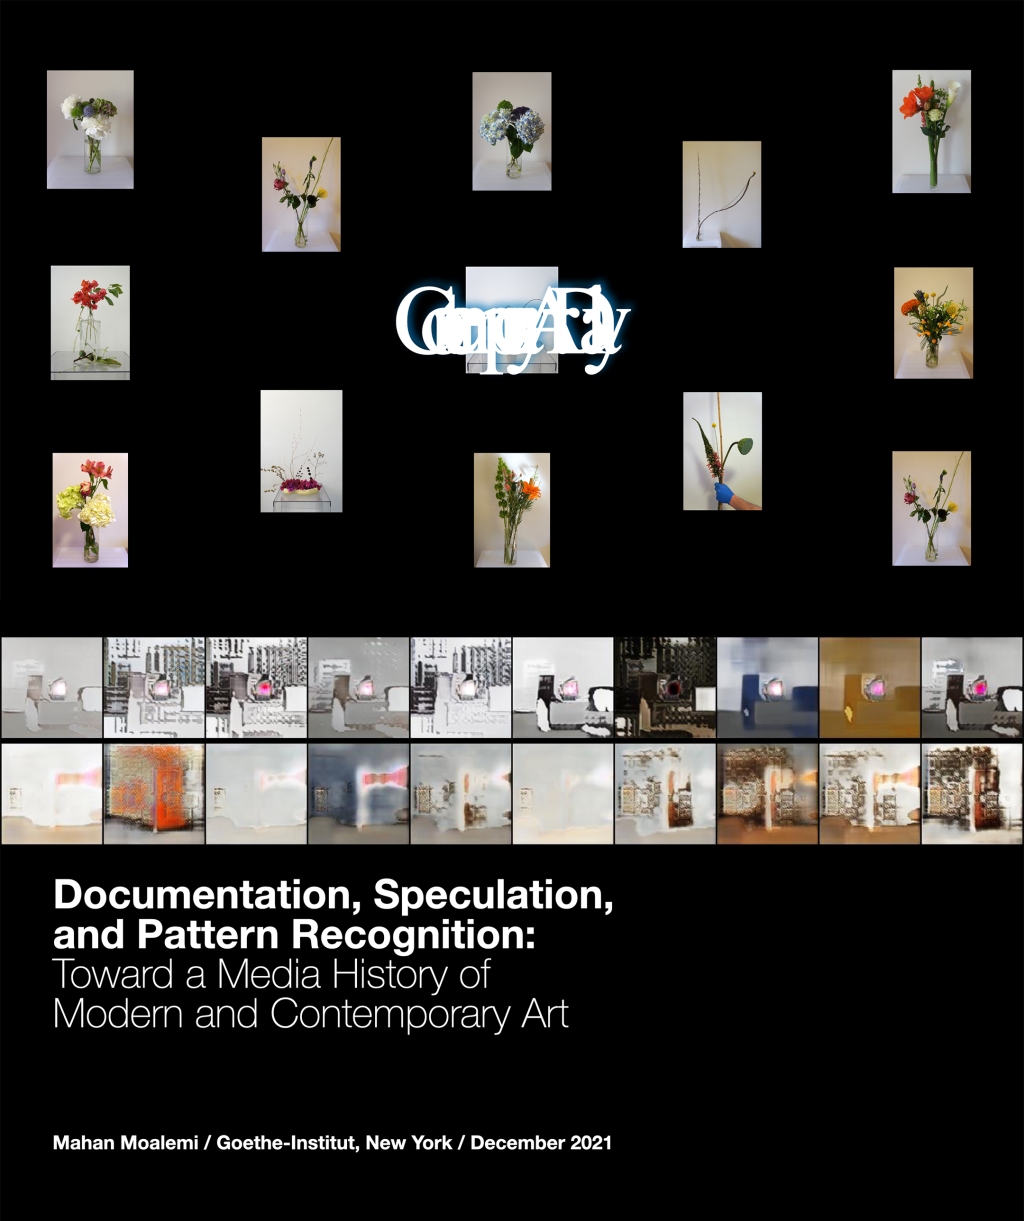 Documentation, Speculation, and Pattern Recognition: Toward a Media History of Modern and Contemporary Art (and Les Fleurs du mal)